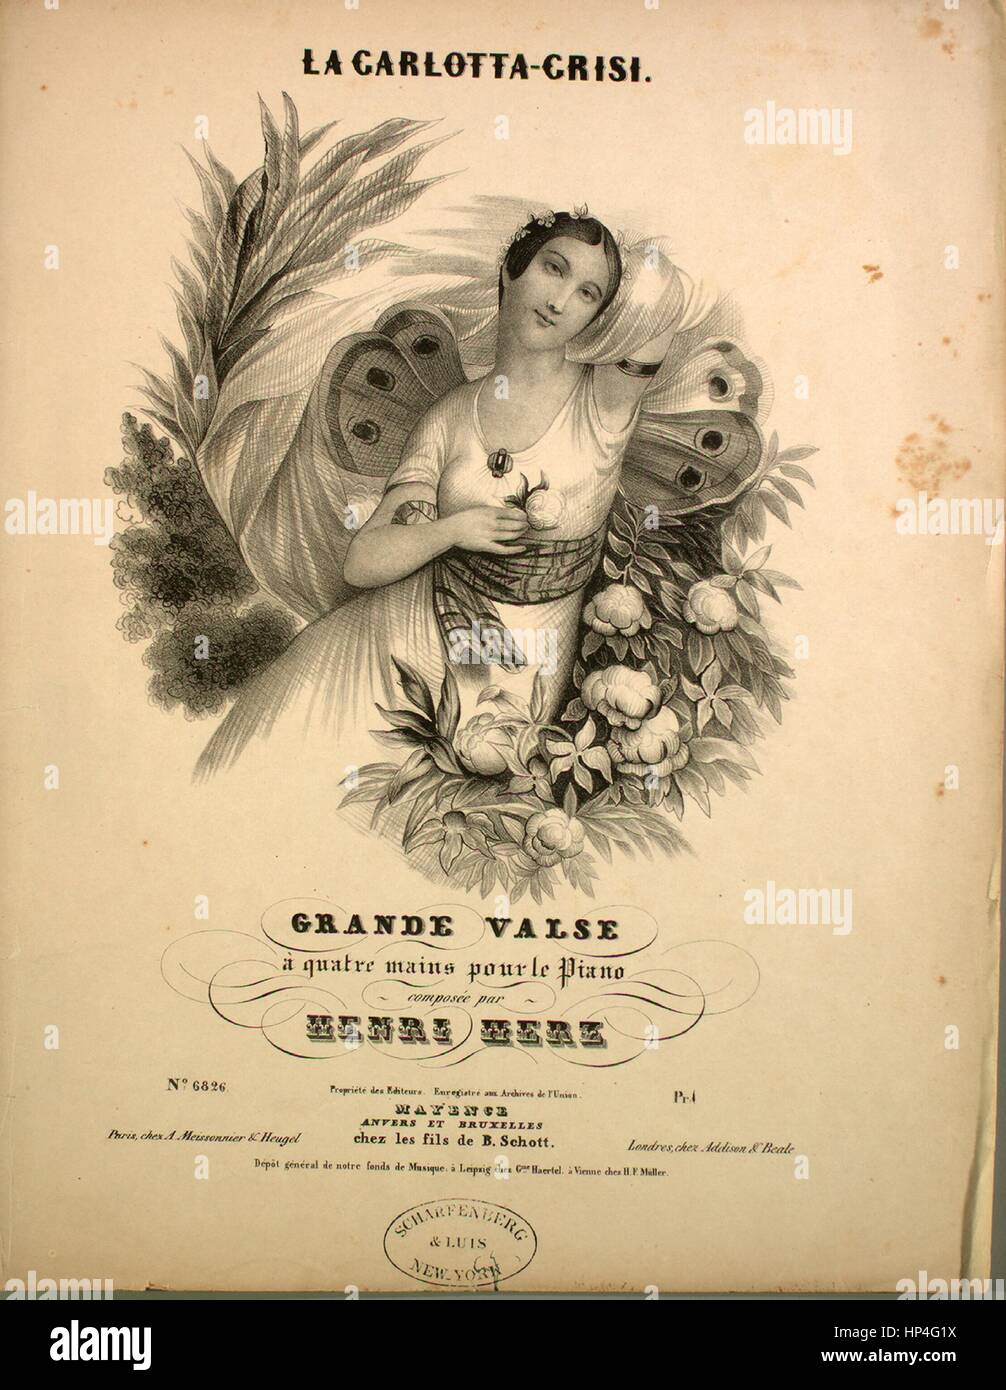 Sheet music cover image of the song 'La Carlotta-Crisi Grand Valse `a quatre mains pour le Piano', with original authorship notes reading 'Composee par Henri Herz', 1900. The publisher is listed as 'chez les fils de B. Schott', the form of composition is 'cover only, no music', the instrumentation is 'piano four hands', the first line reads 'None', and the illustration artist is listed as 'None'. Stock Photo